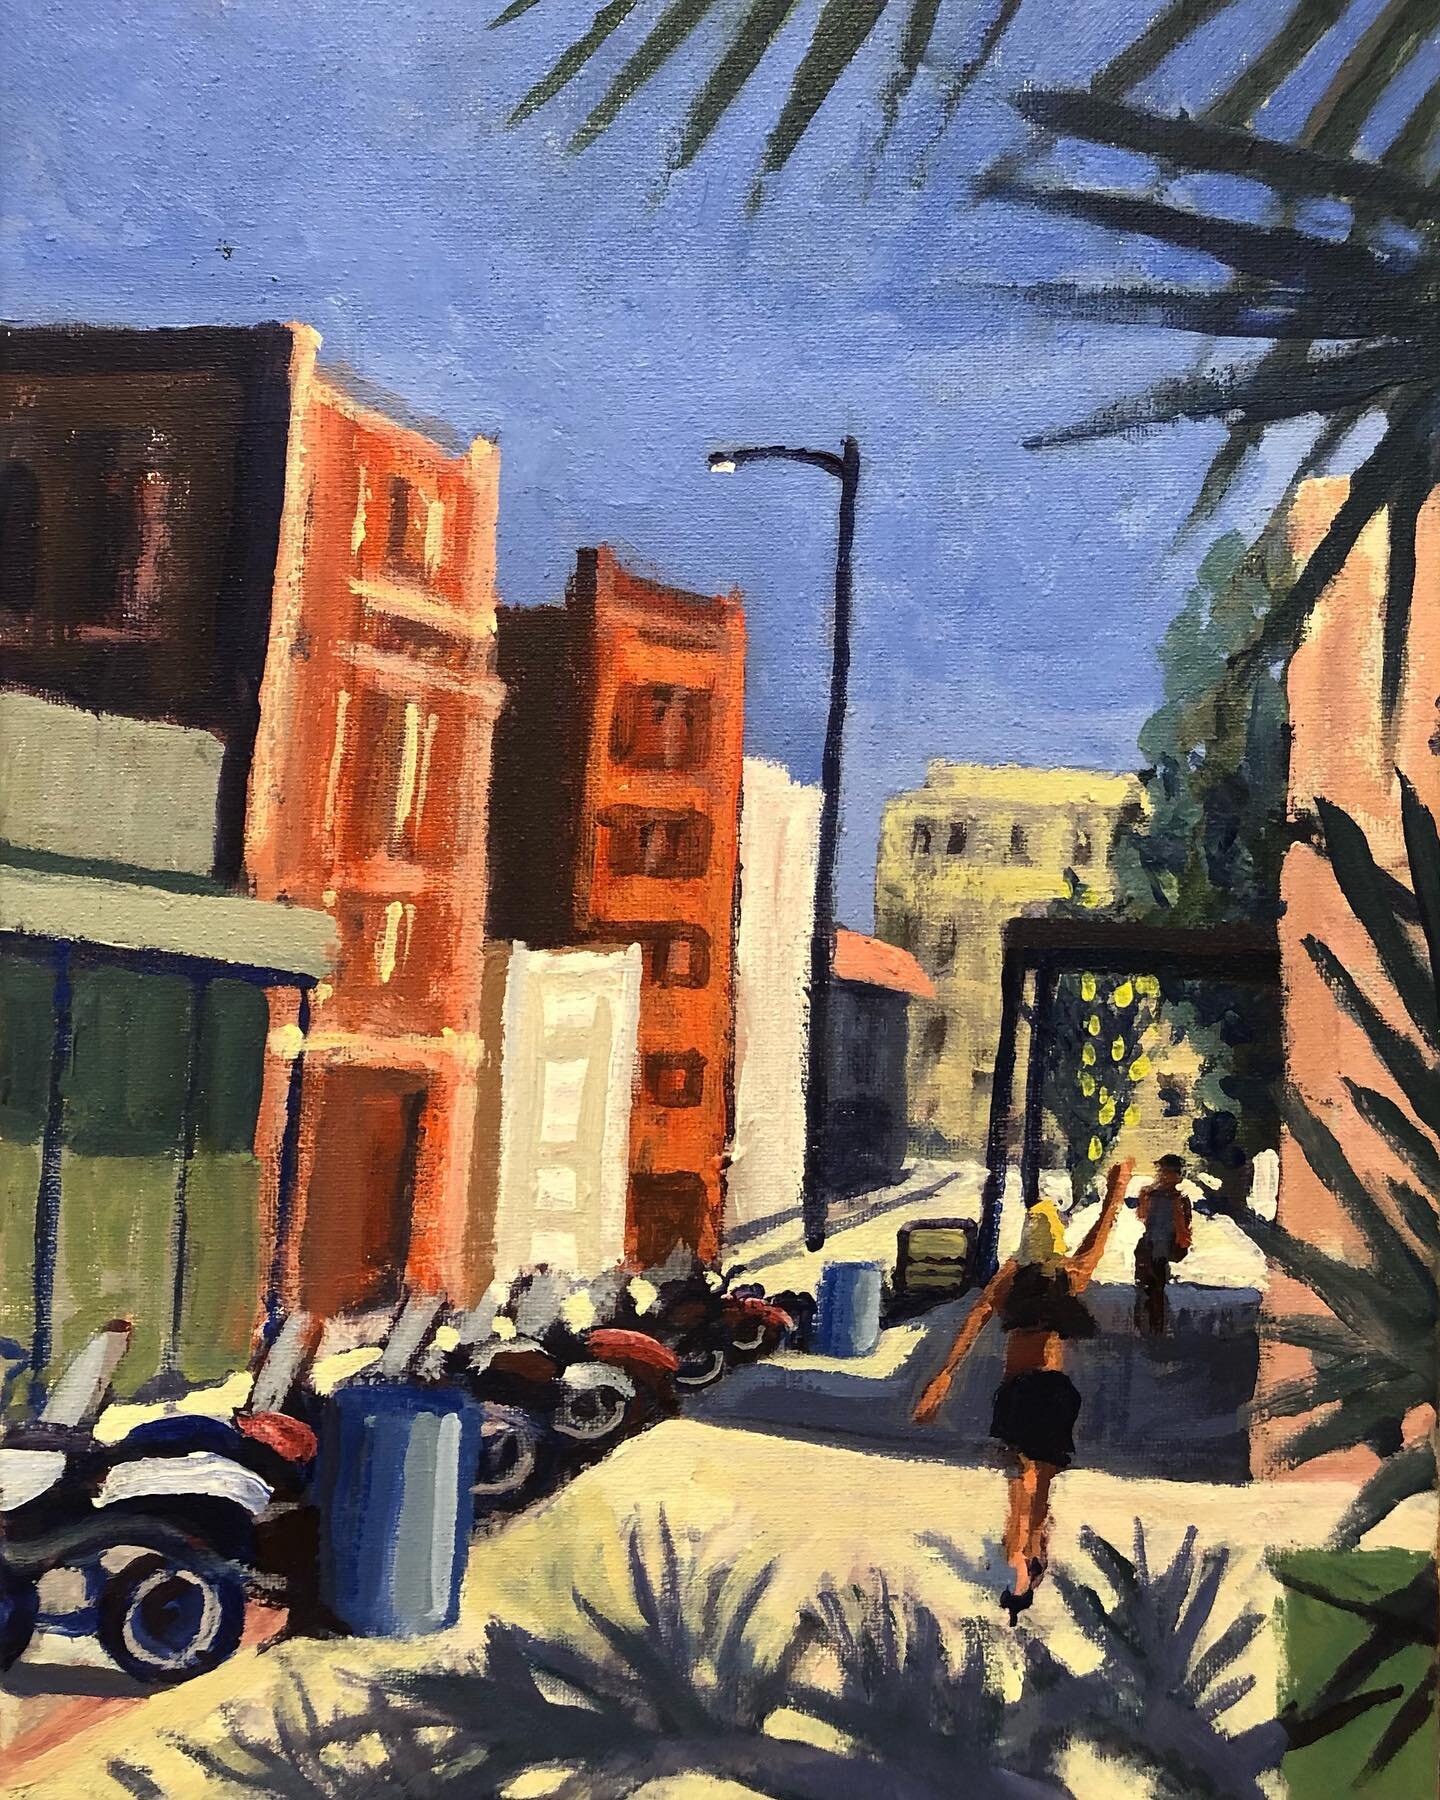 This one is titled &ldquo;She&rsquo;s yelling louder He&rsquo;s walking faster. Kind of a Lone-star Rally Weekend thing. It&rsquo;s painting on Market St. when they walked by. Galveston streets are theater, and we&rsquo;re all part of the show 🙃#lon